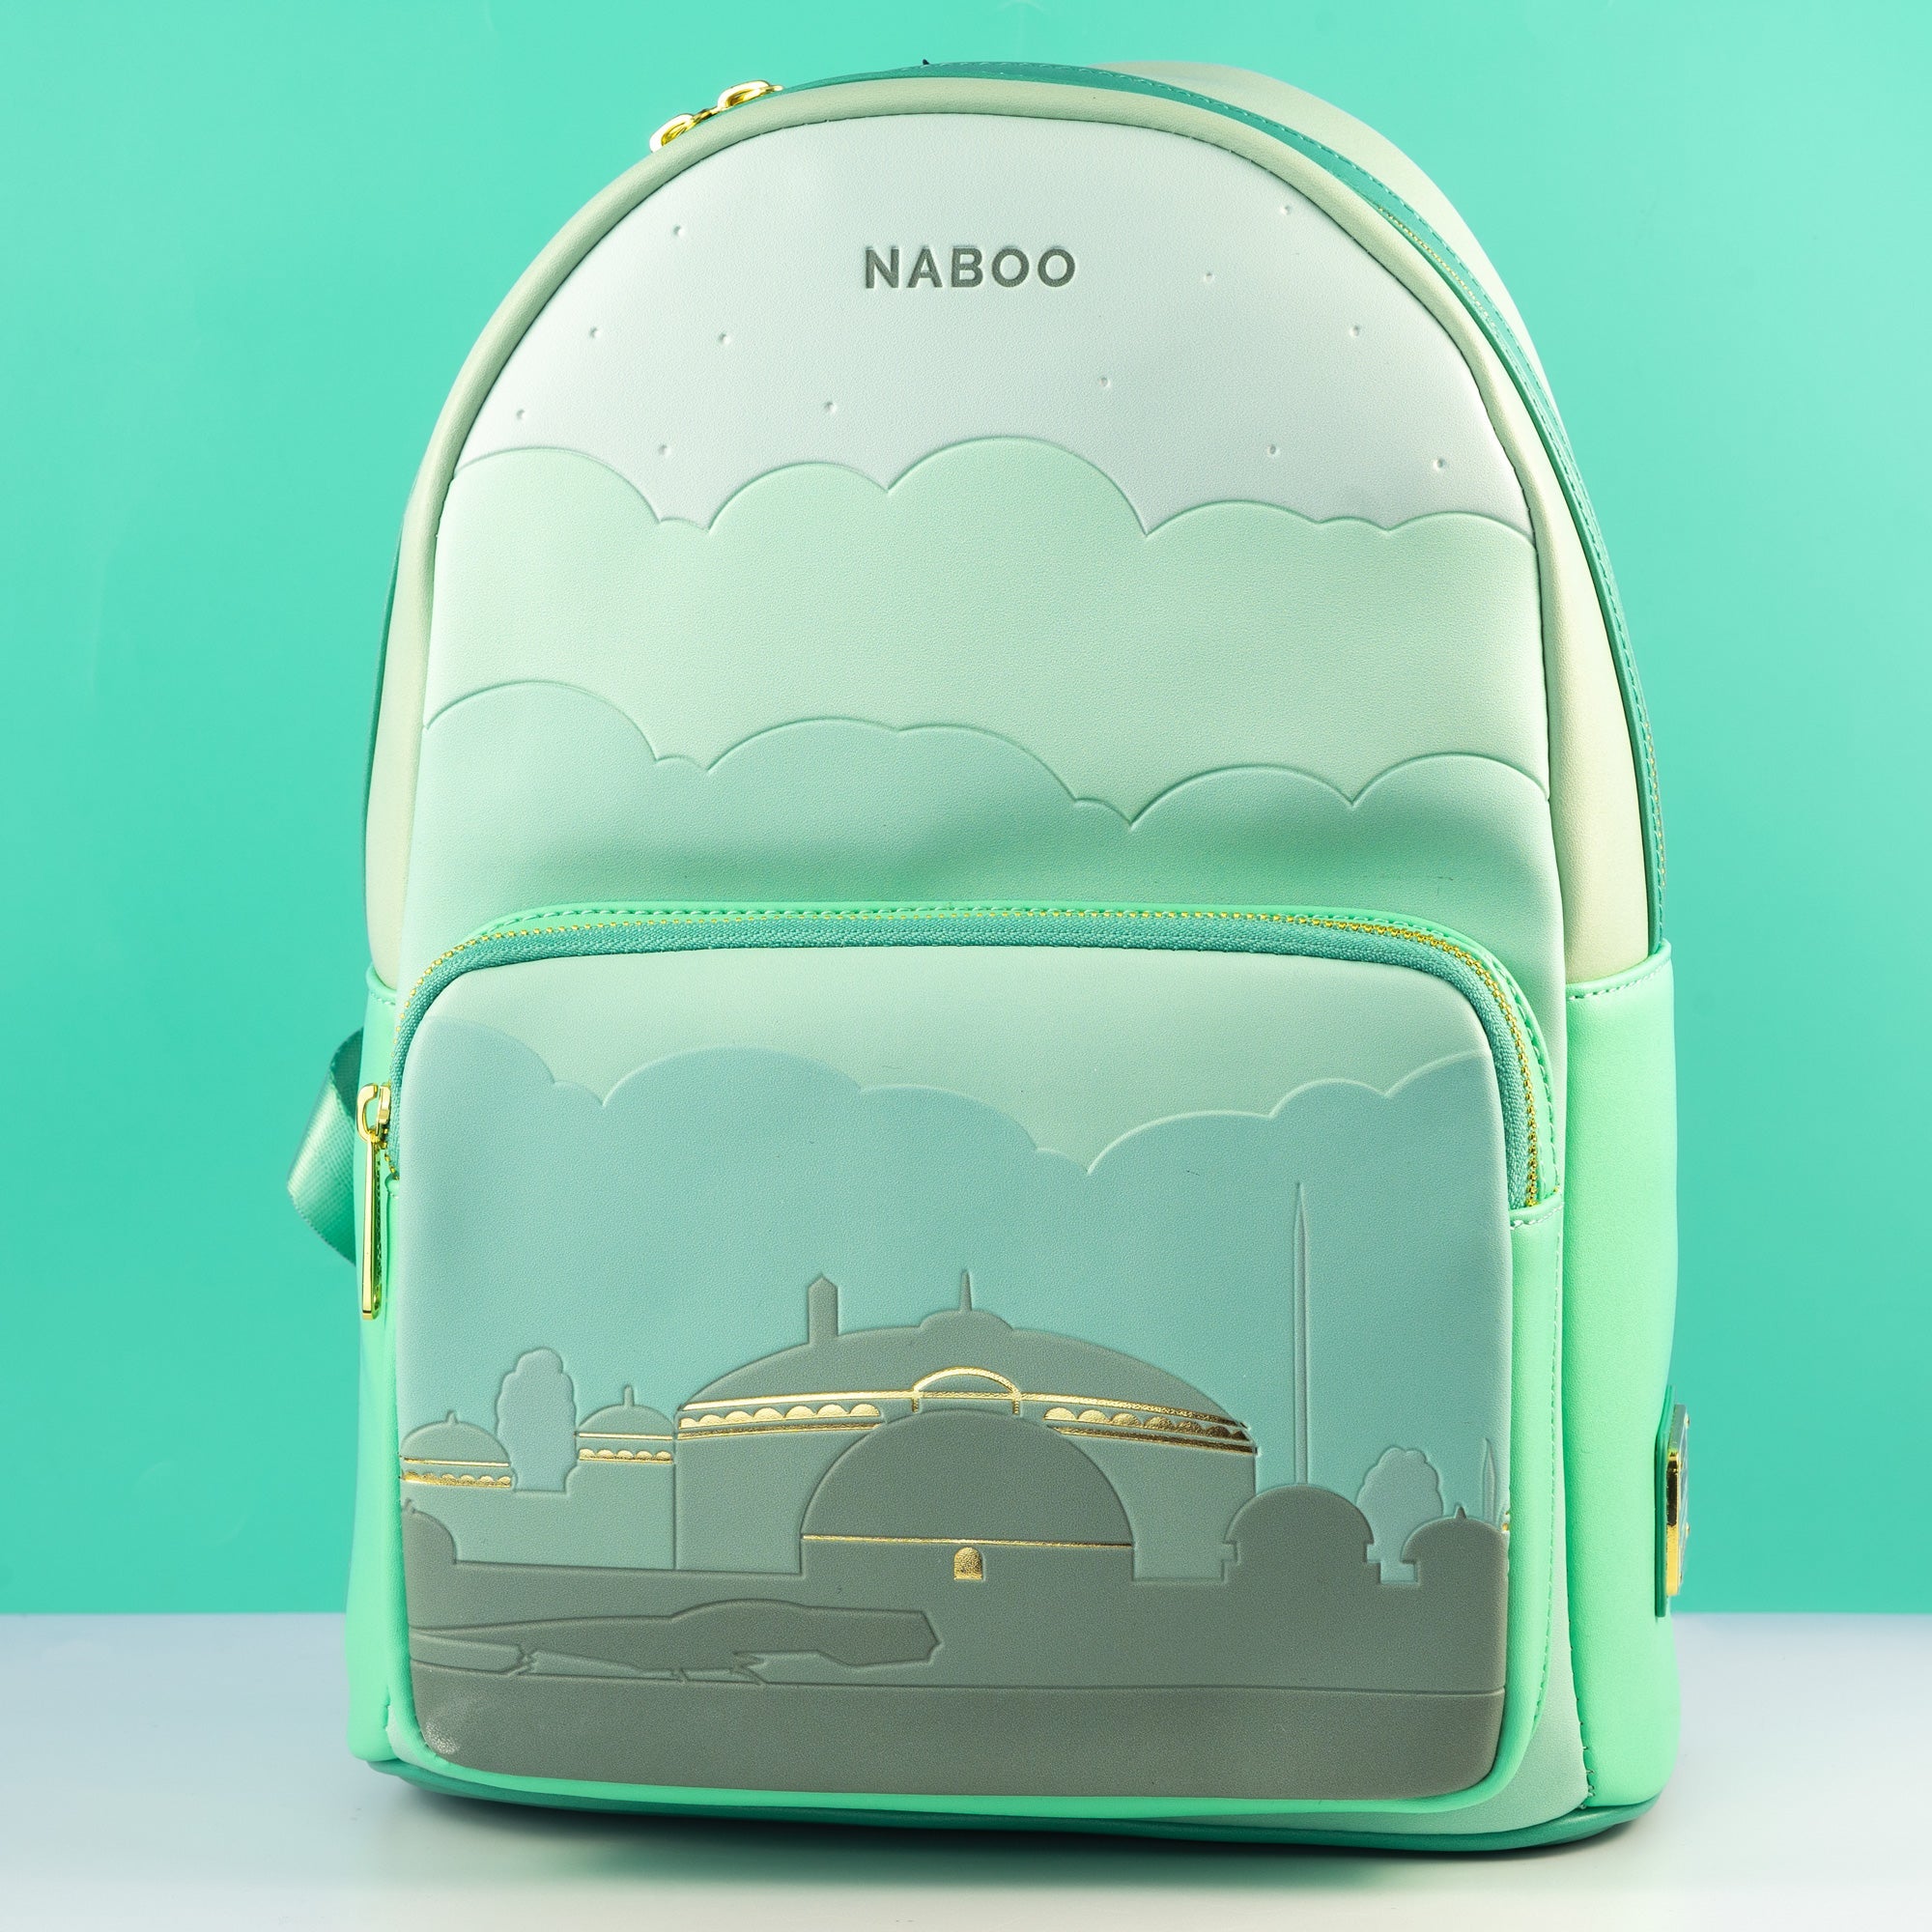 Loungefly x Star Wars Lands Naboo Mini Backpack - GeekCore